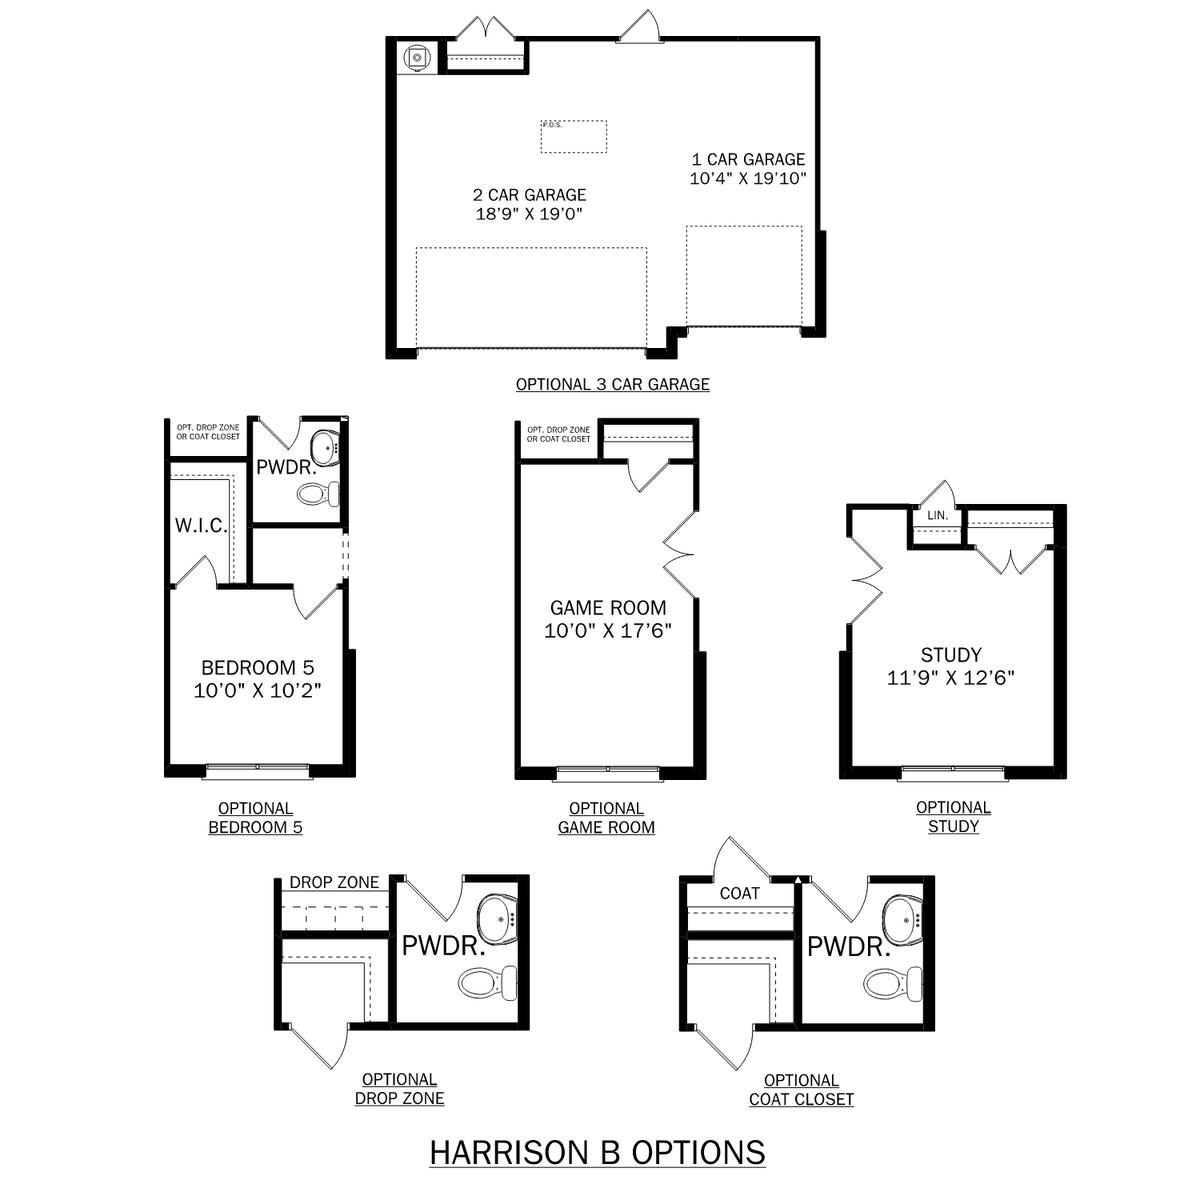 2 - The Harrison B floor plan layout for 103 Ackert Drive in Davidson Homes' Pikes Ridge community.